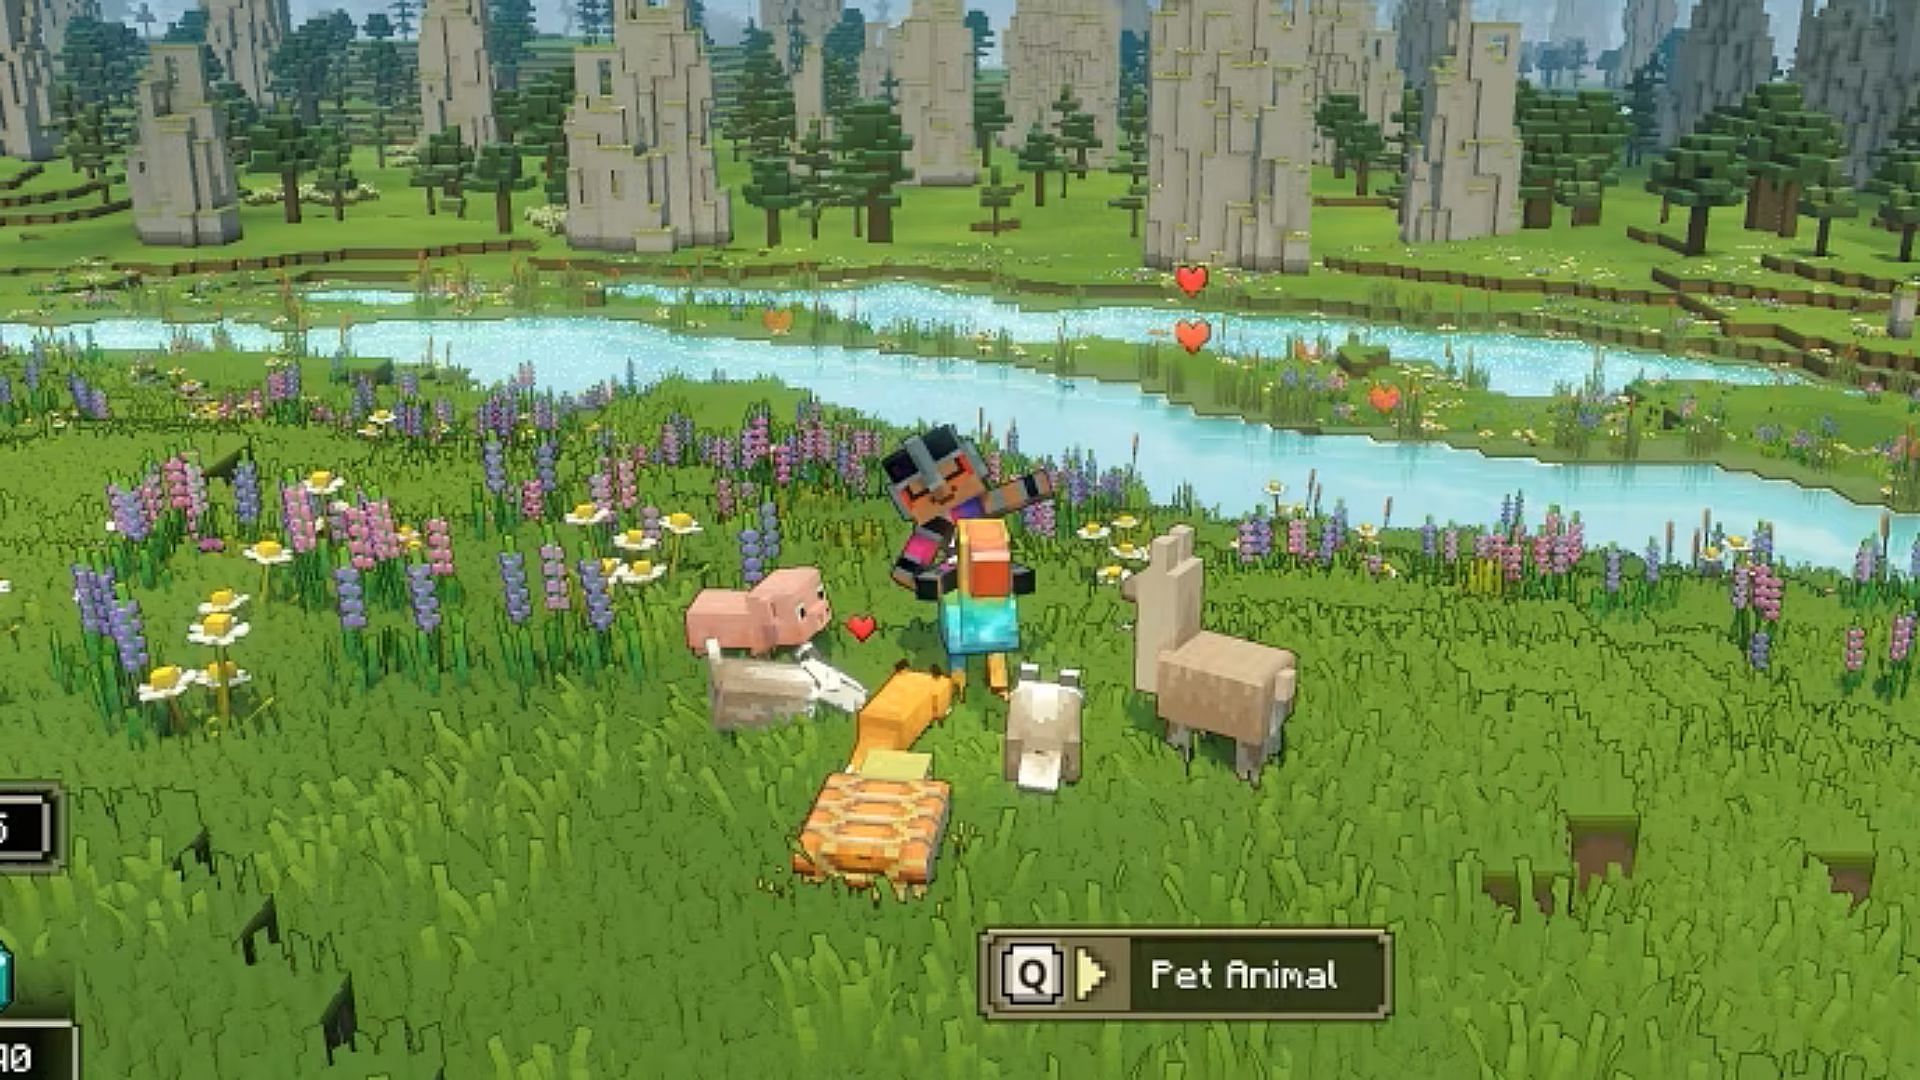 An in-game character petting several animals that have surrounded them in Minecraft Legends (Image via Mojang)